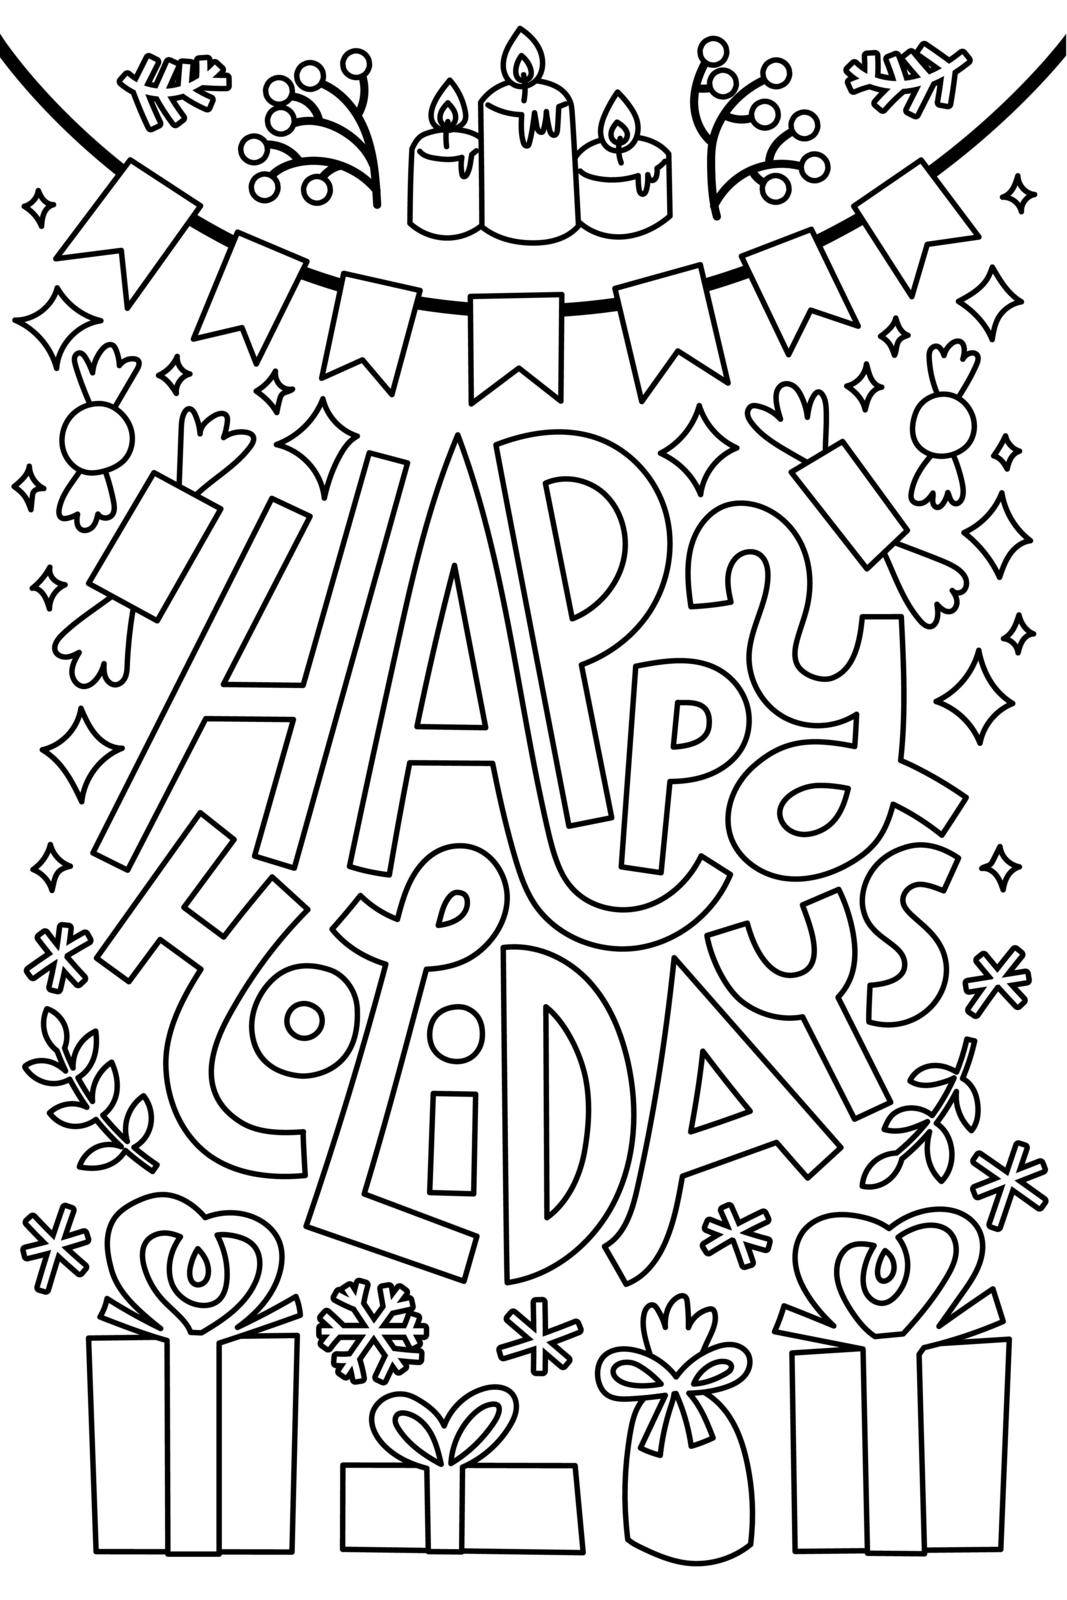 Happy holidays coloring book page. Black and white doodle illustration. Christmas, Hannukah, inclusive neutral greeting. Vertical, portrait-oriented.